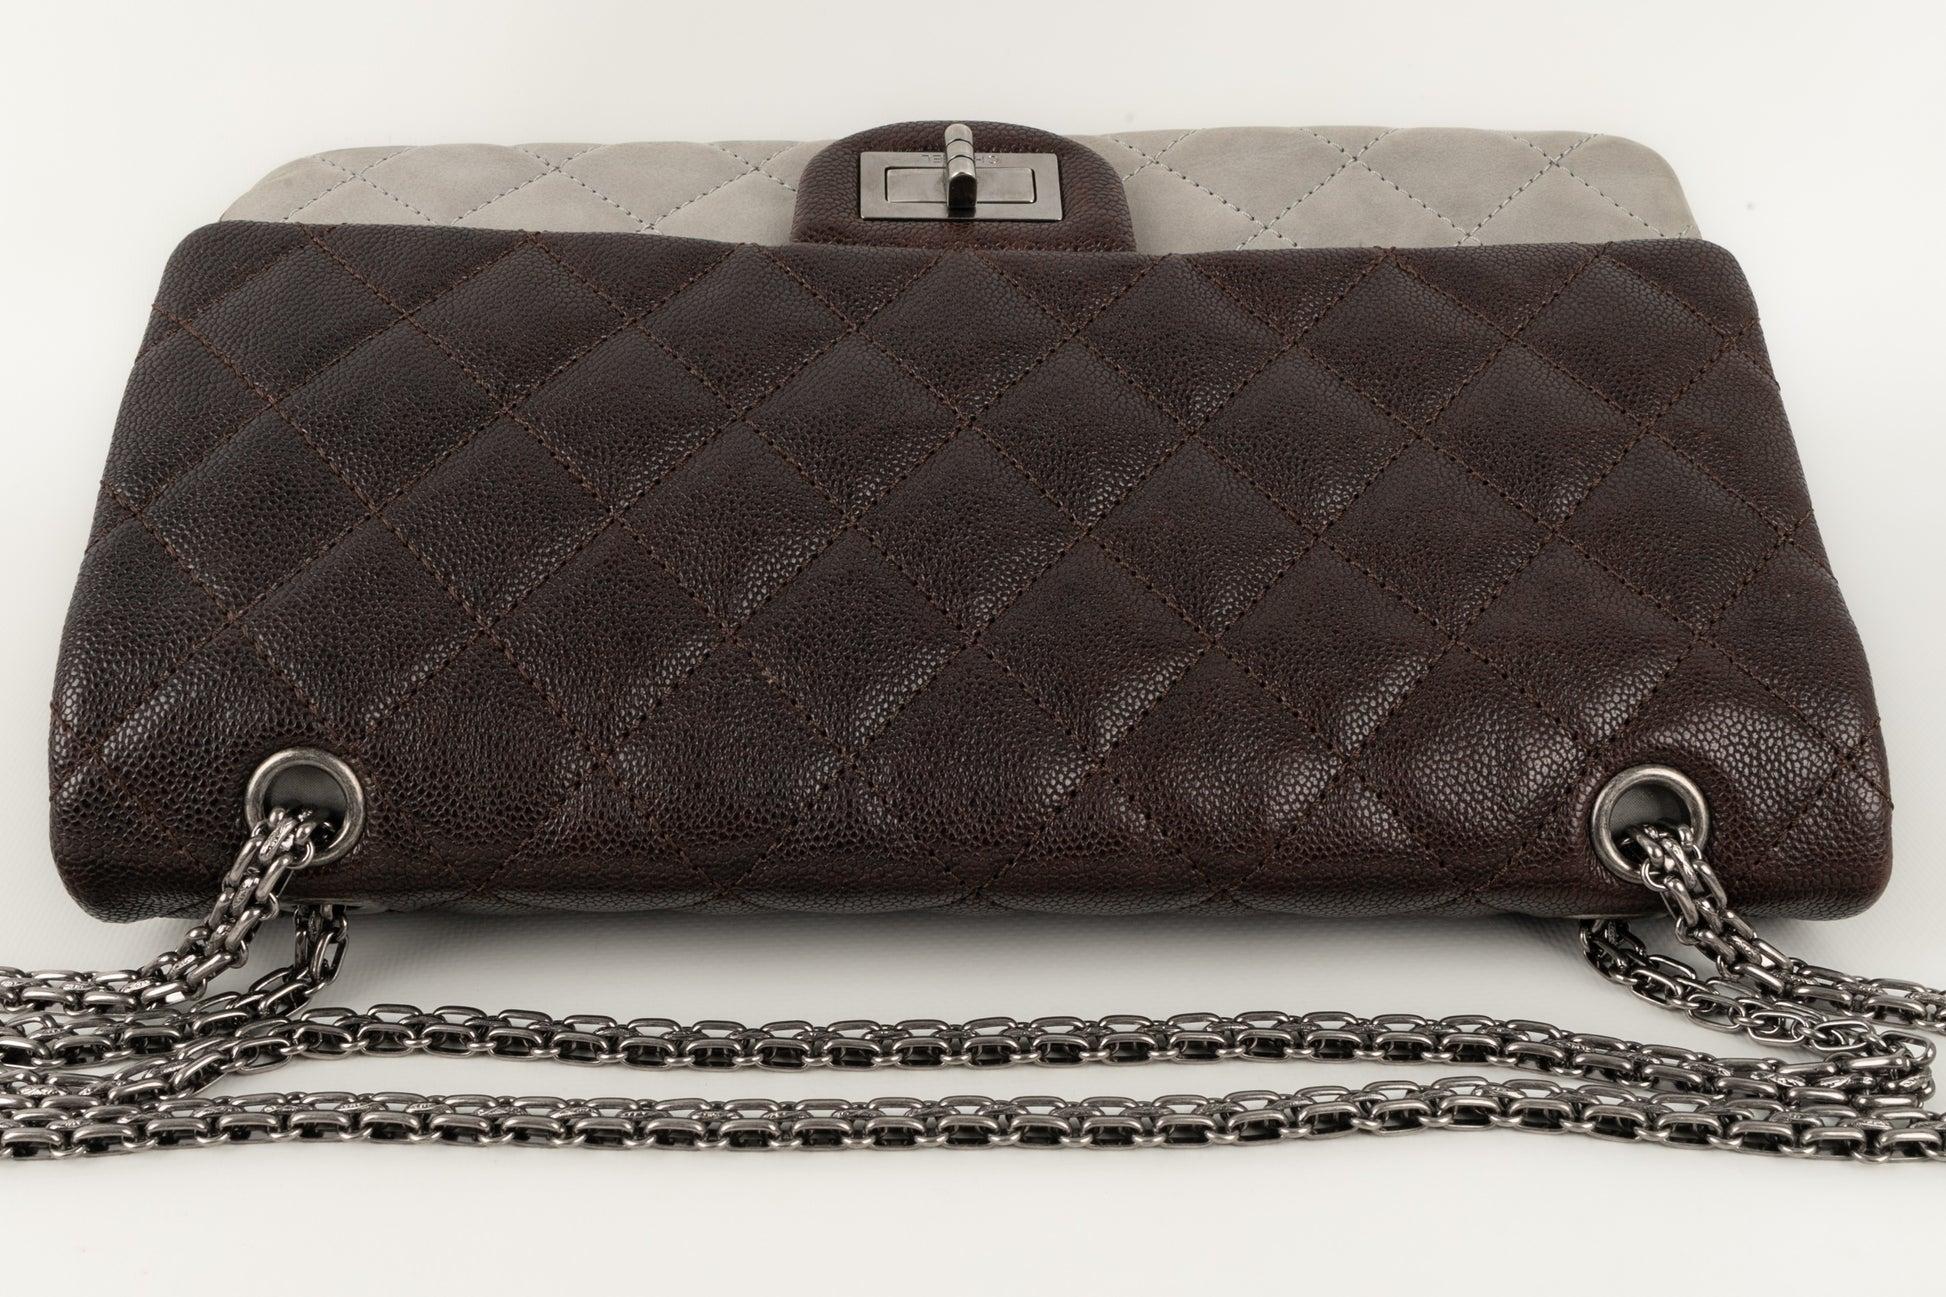 Chanel 2.55 Leather & Grain Leather Bag with Silvery Metal Elements, 2010/2011 For Sale 1